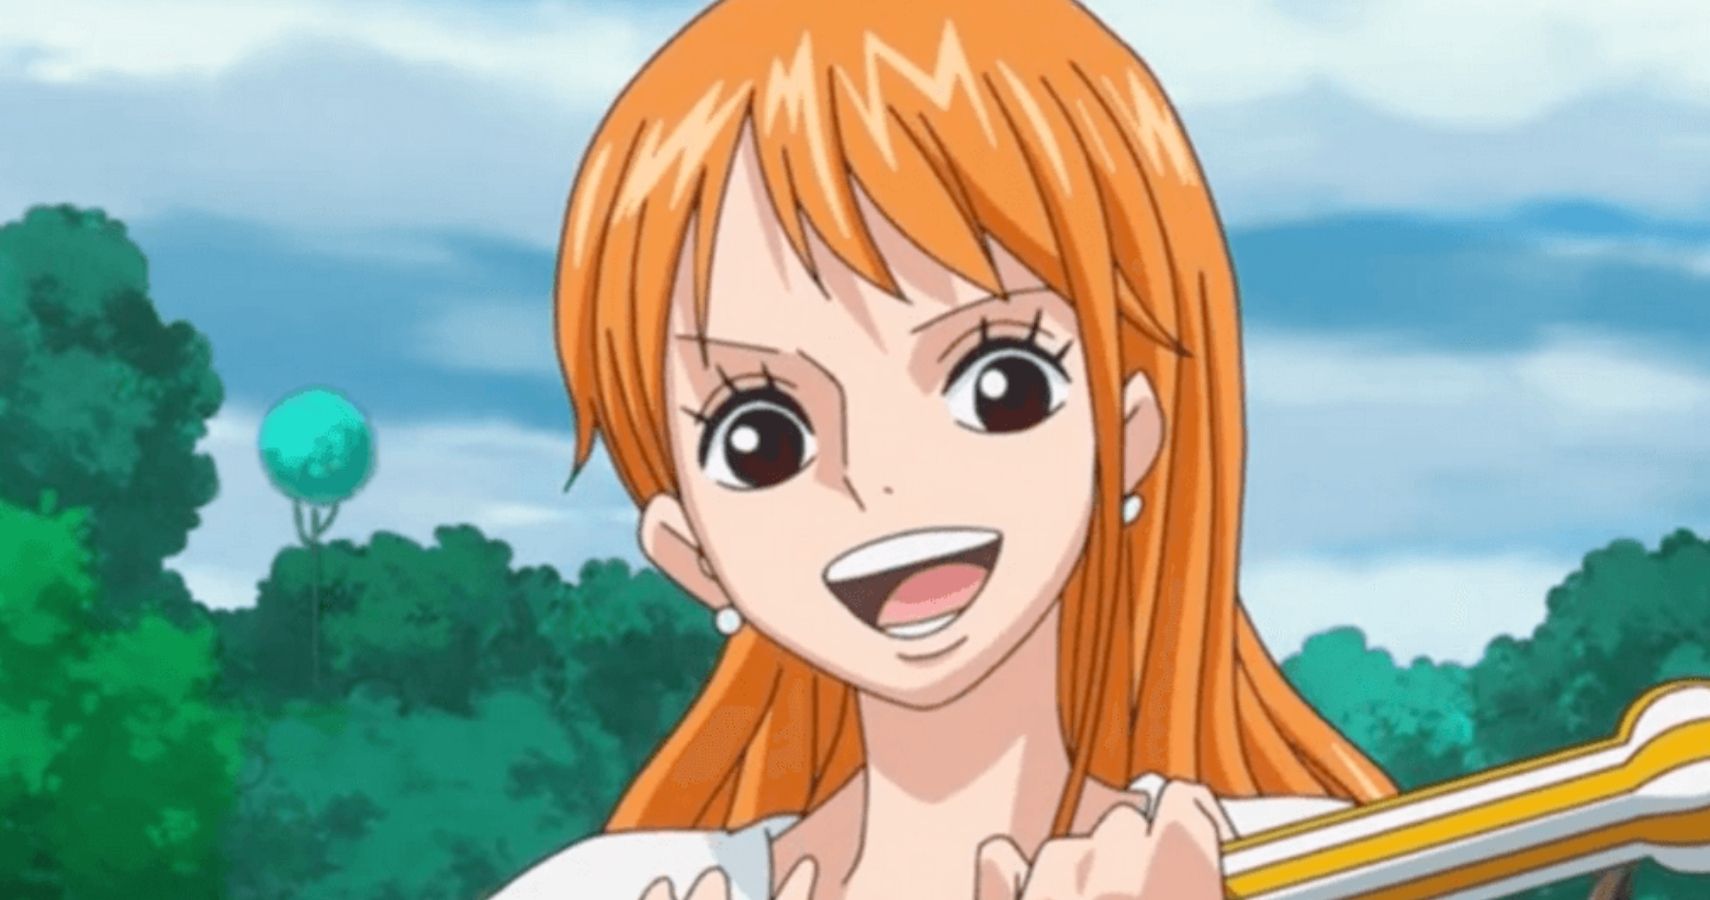 15 Things You Didn't Know About Nami From One Piece